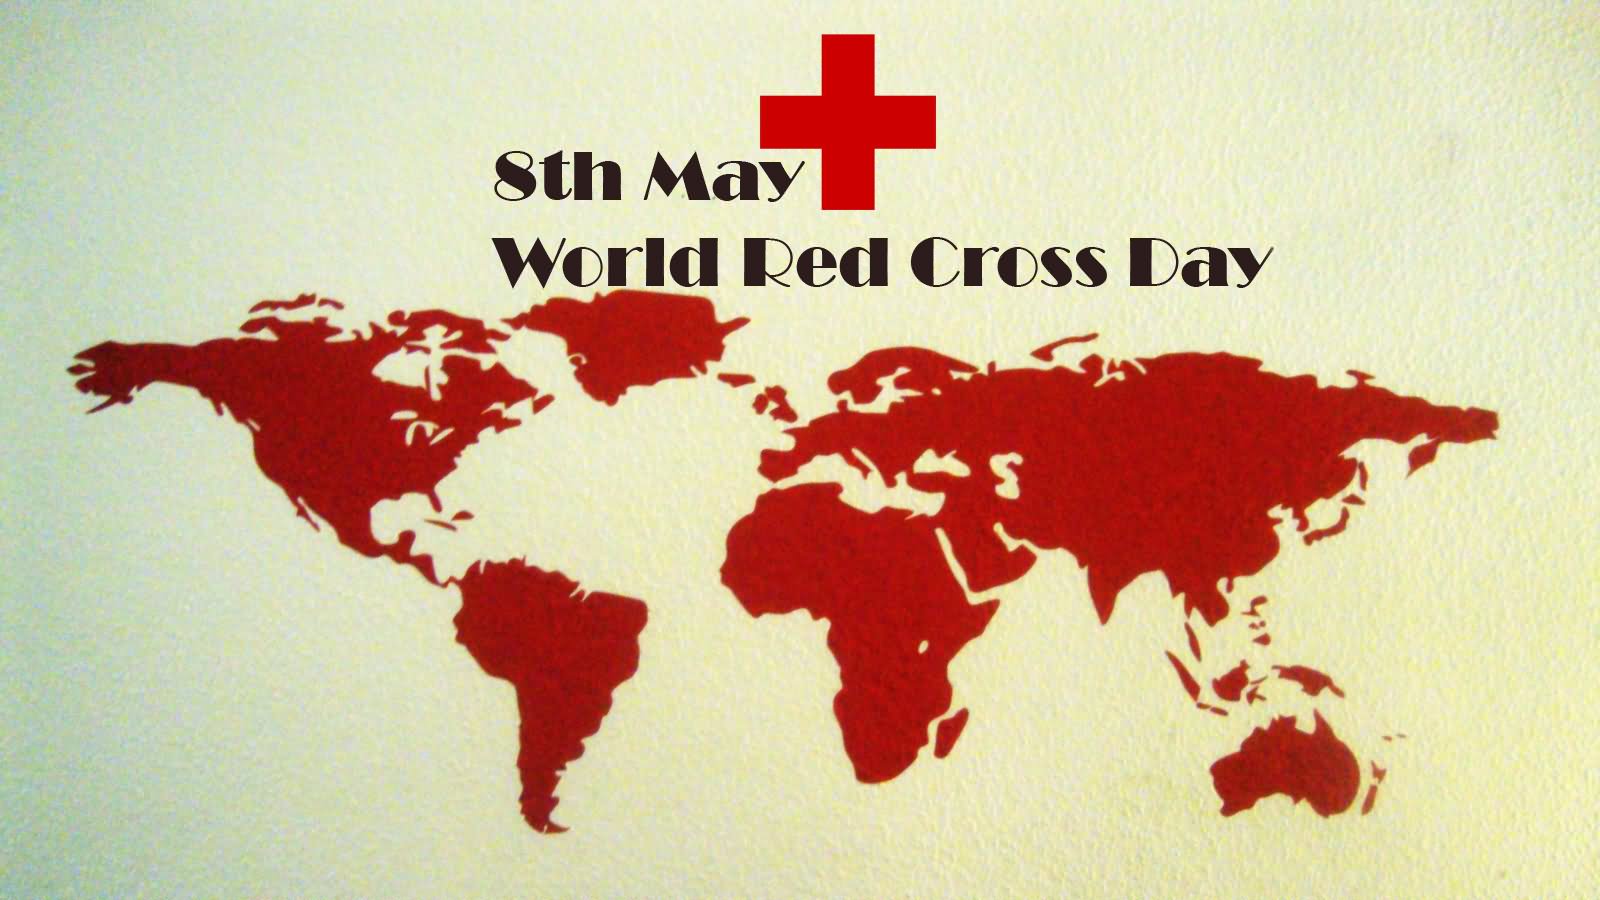 8th May World Red Cross Day